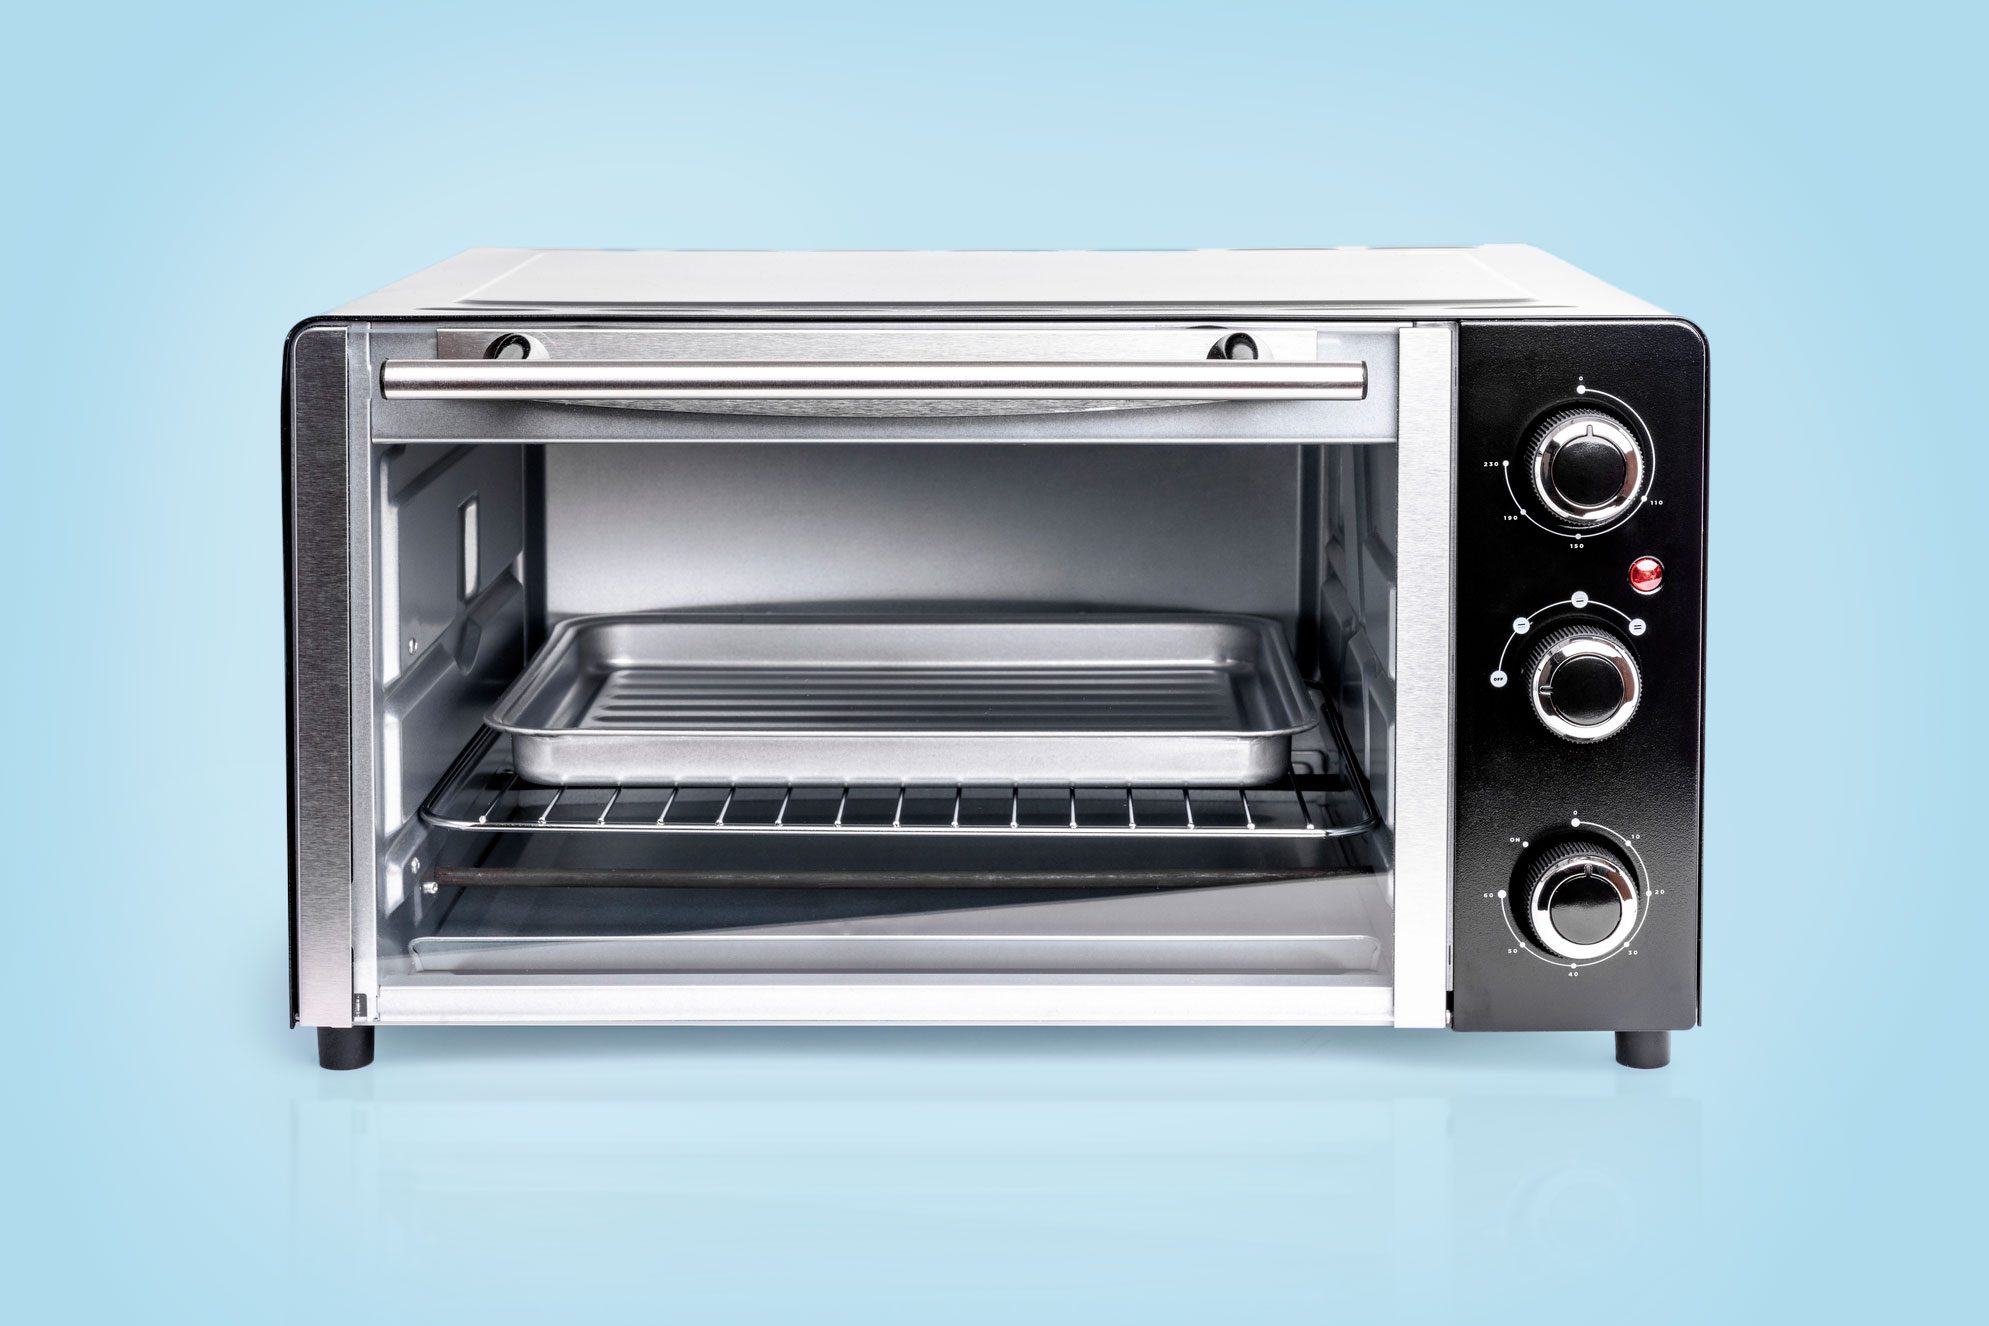 How To Clean A Toaster Oven And Keep It Clean!